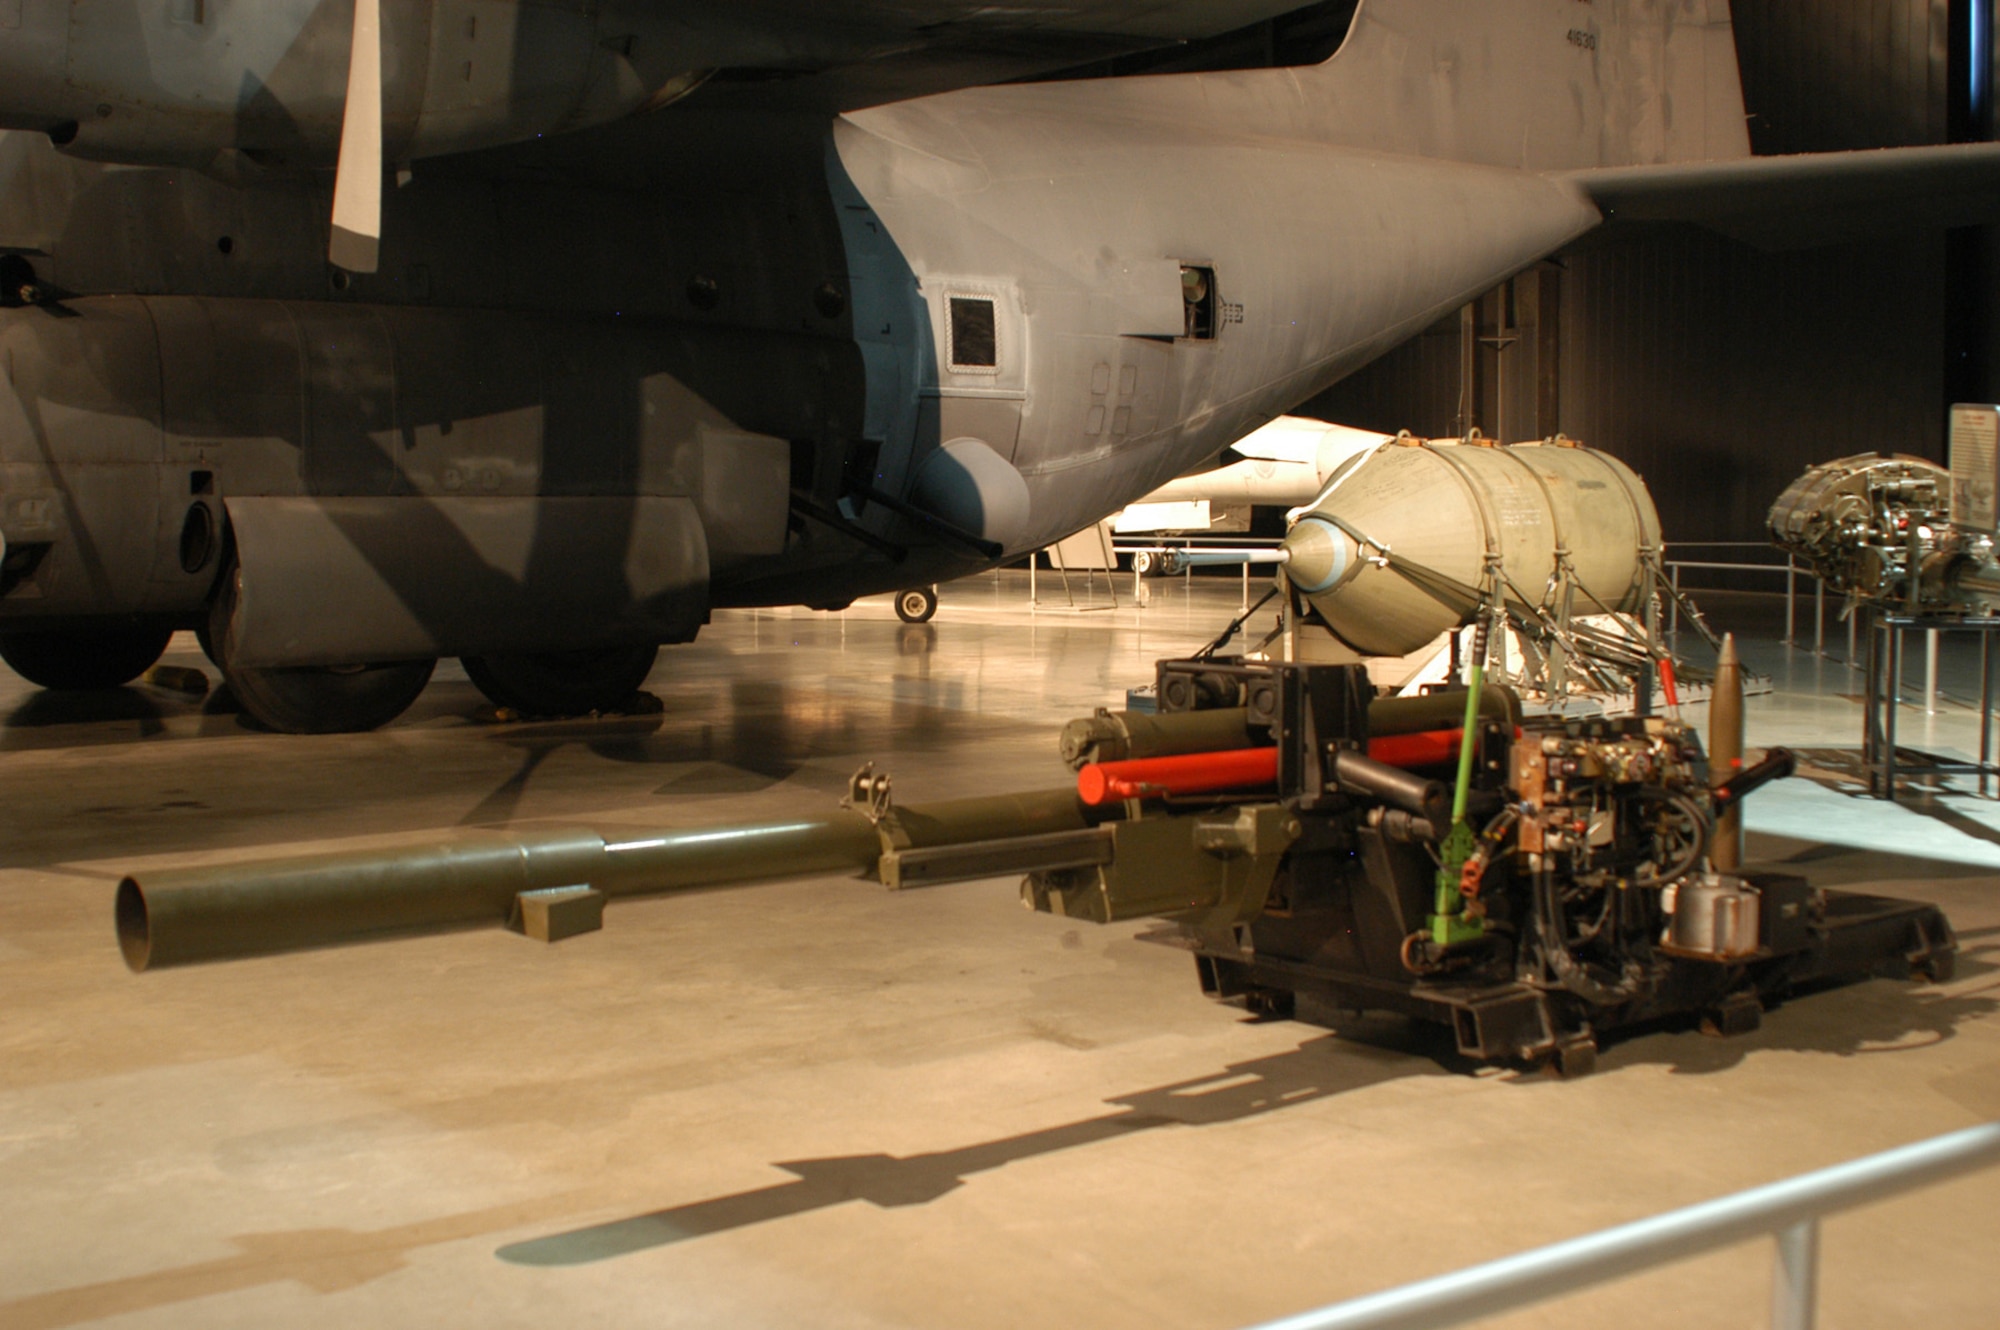 DAYTON, Ohio - M102 105mm Cannon on display at the National Museum of the U.S. Air Force. (U.S. Air Force photo)